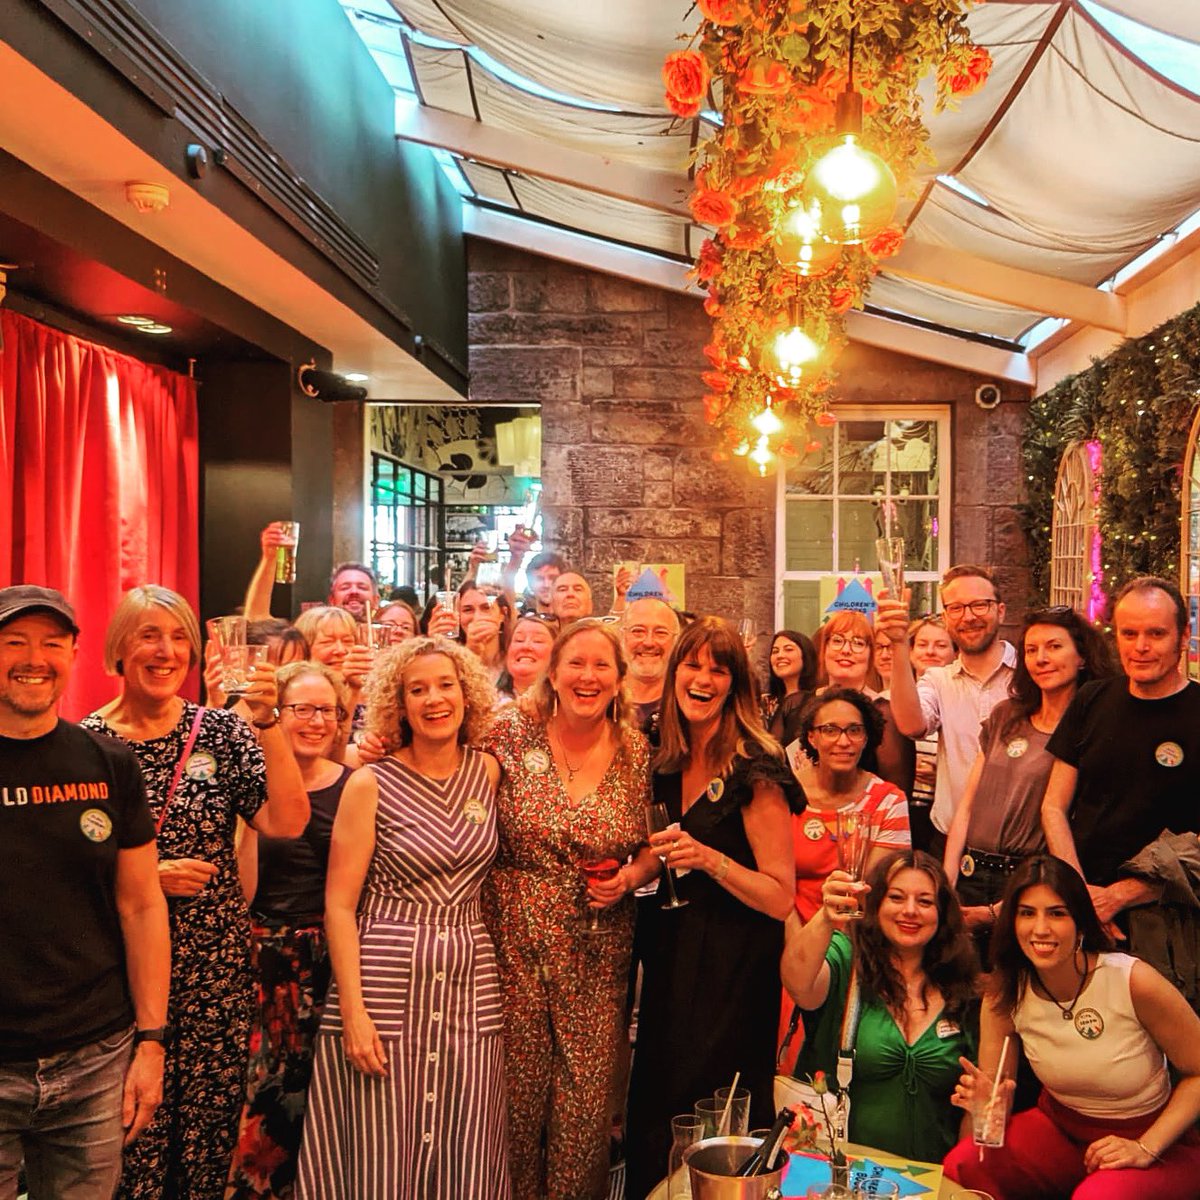 We finally made it to Edinburgh and it was a blast! Thanks to everyone who travelled far and wide to join the @books_north summer social. We loved meeting you all in person. ❤️